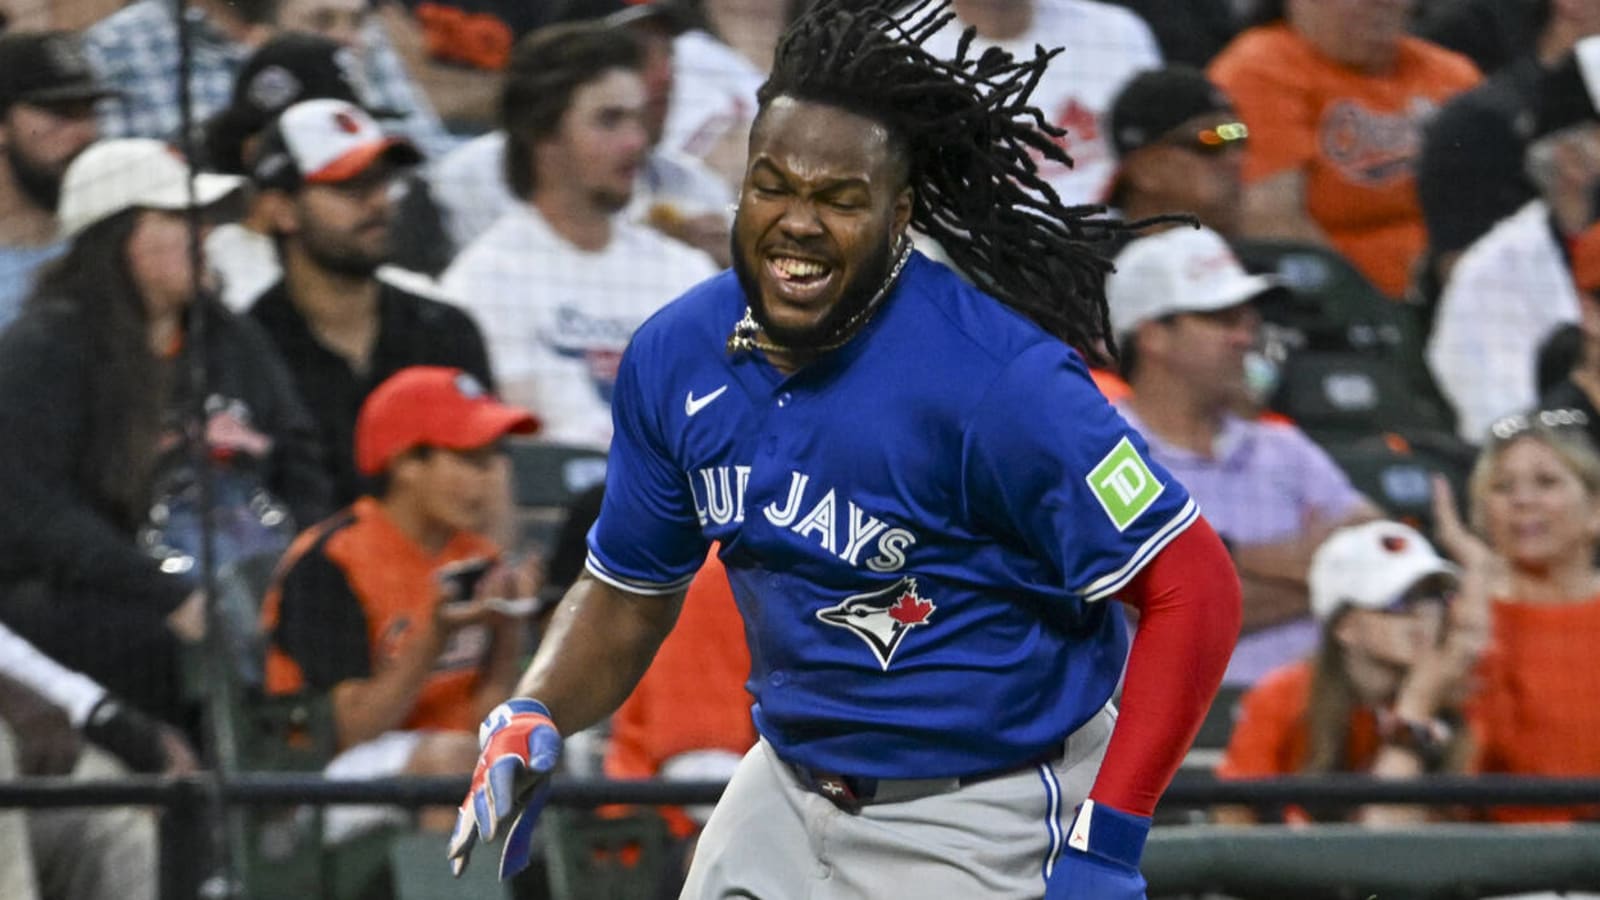 Vladimir Guerrero Jr. is Finding His Groove at the Plate